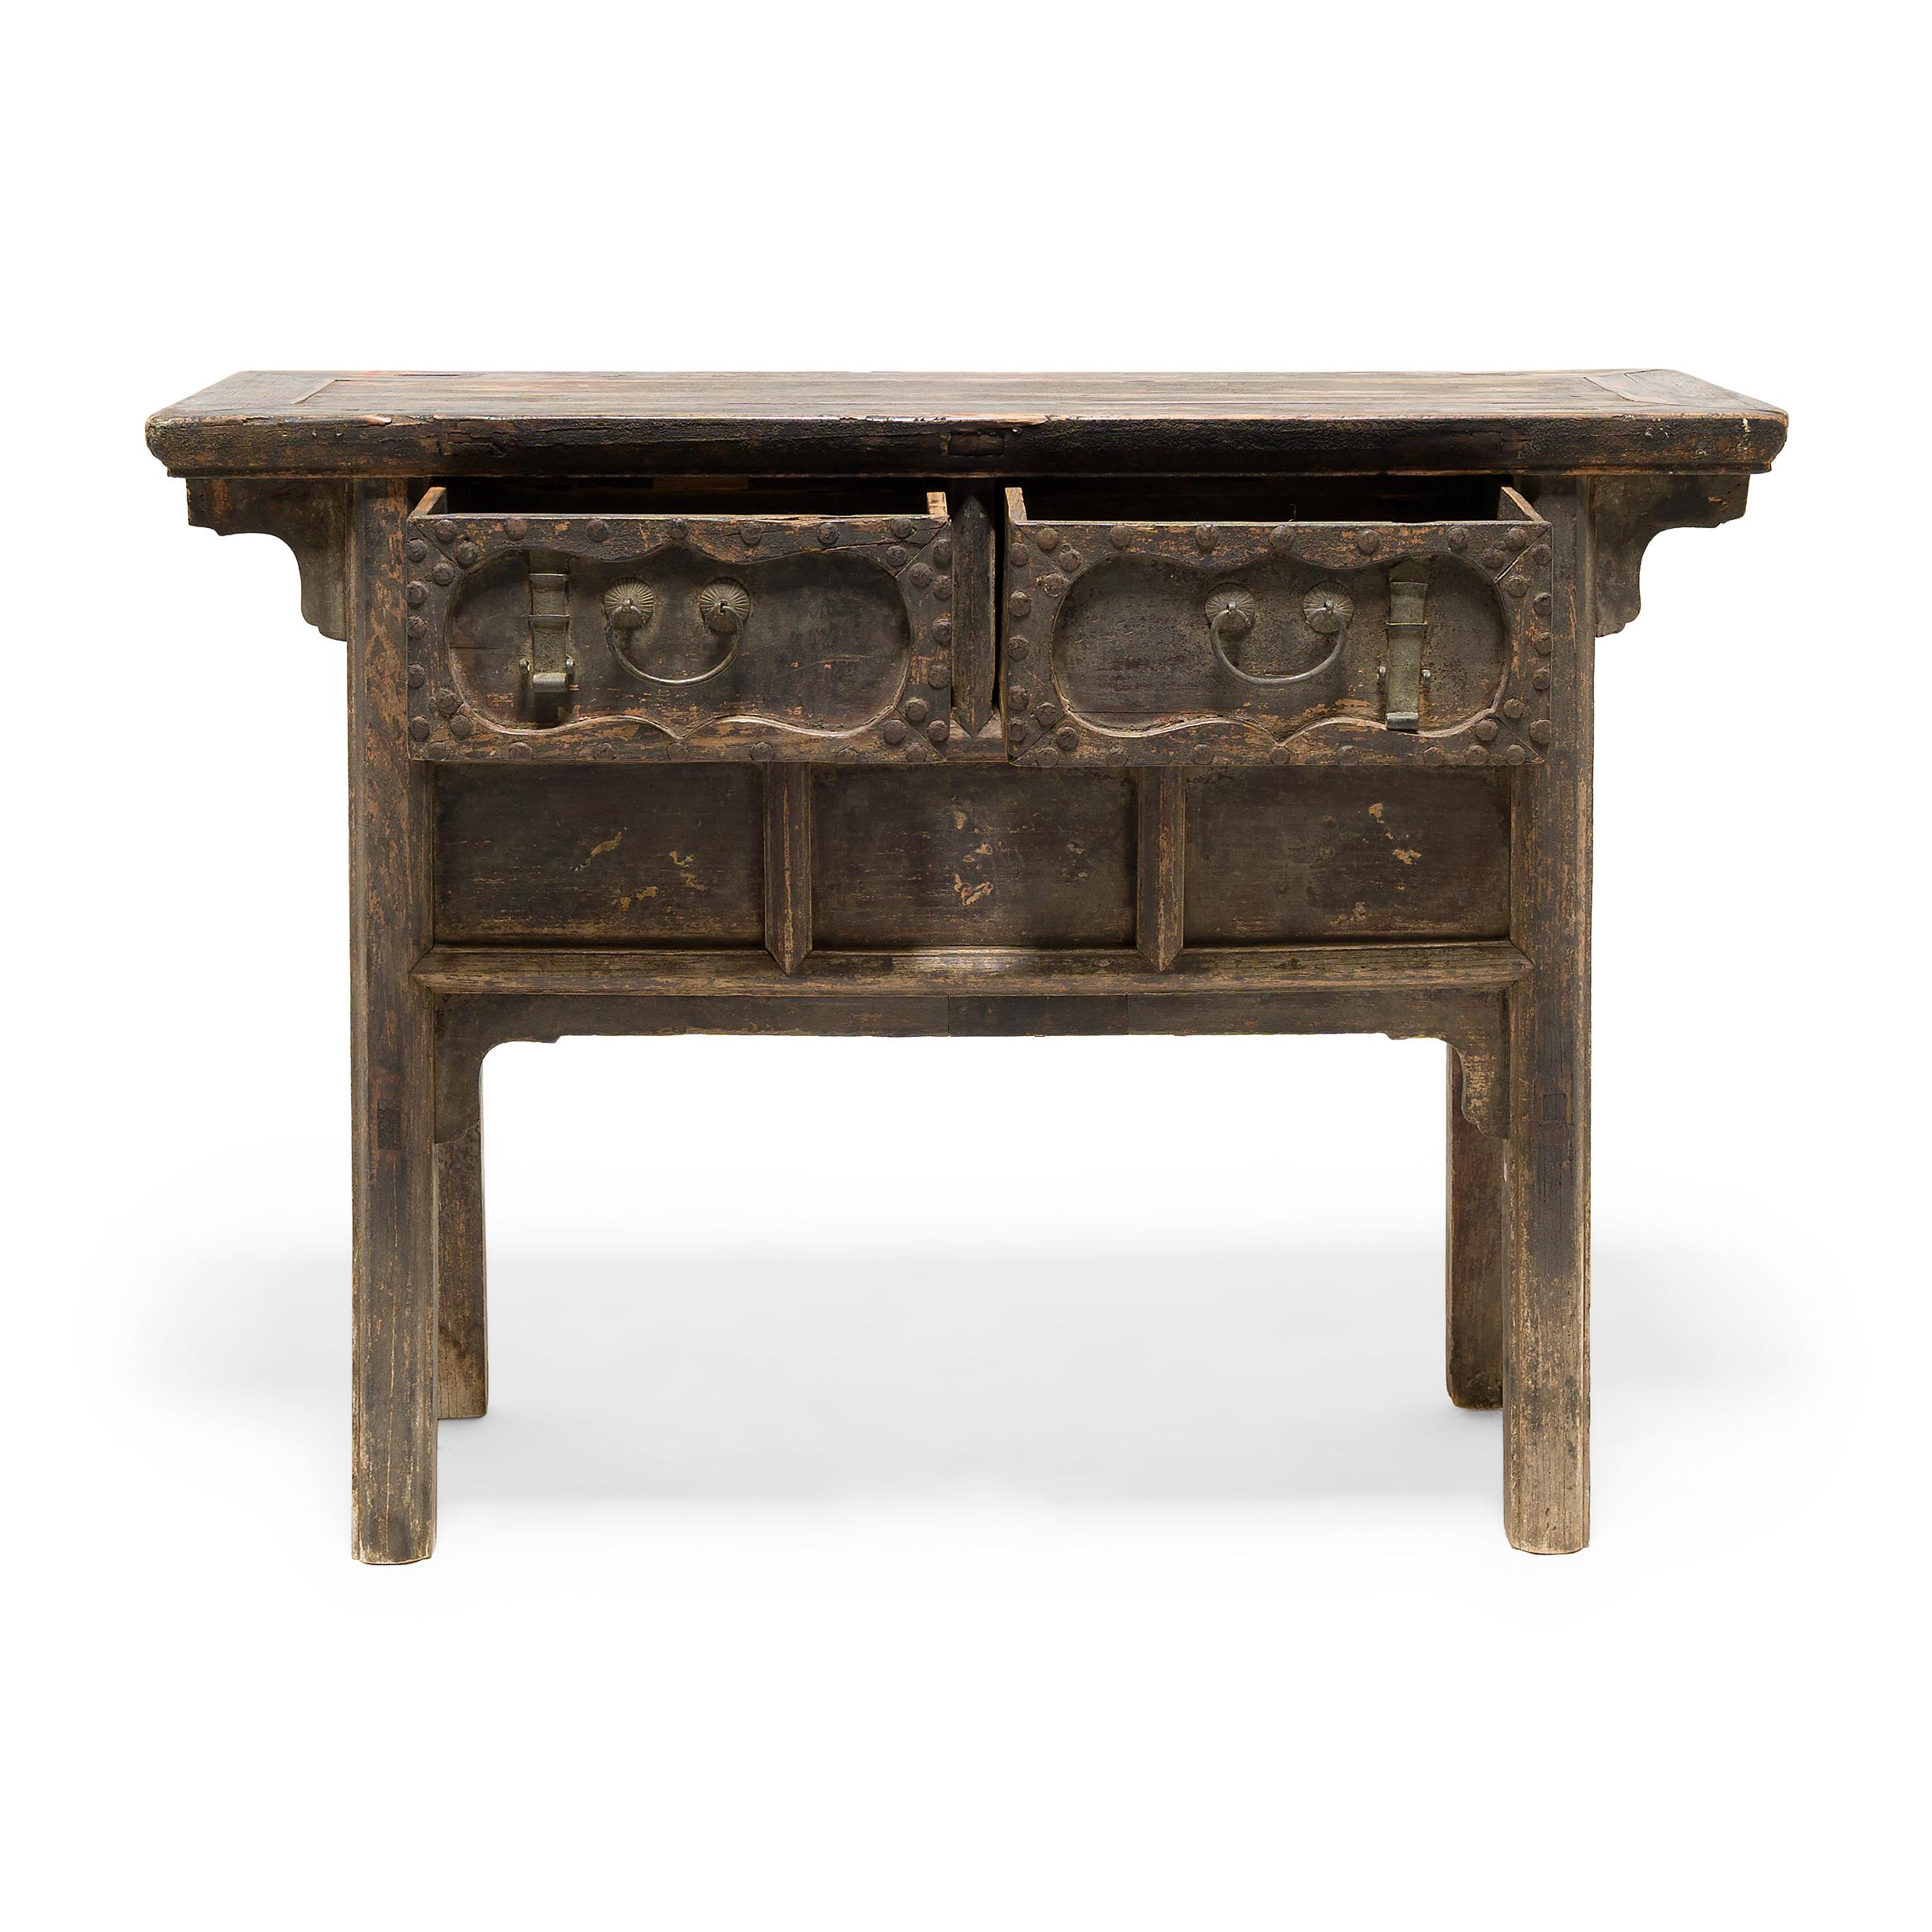 19th Century Chinese Two Drawer Offering Table, c. 1800